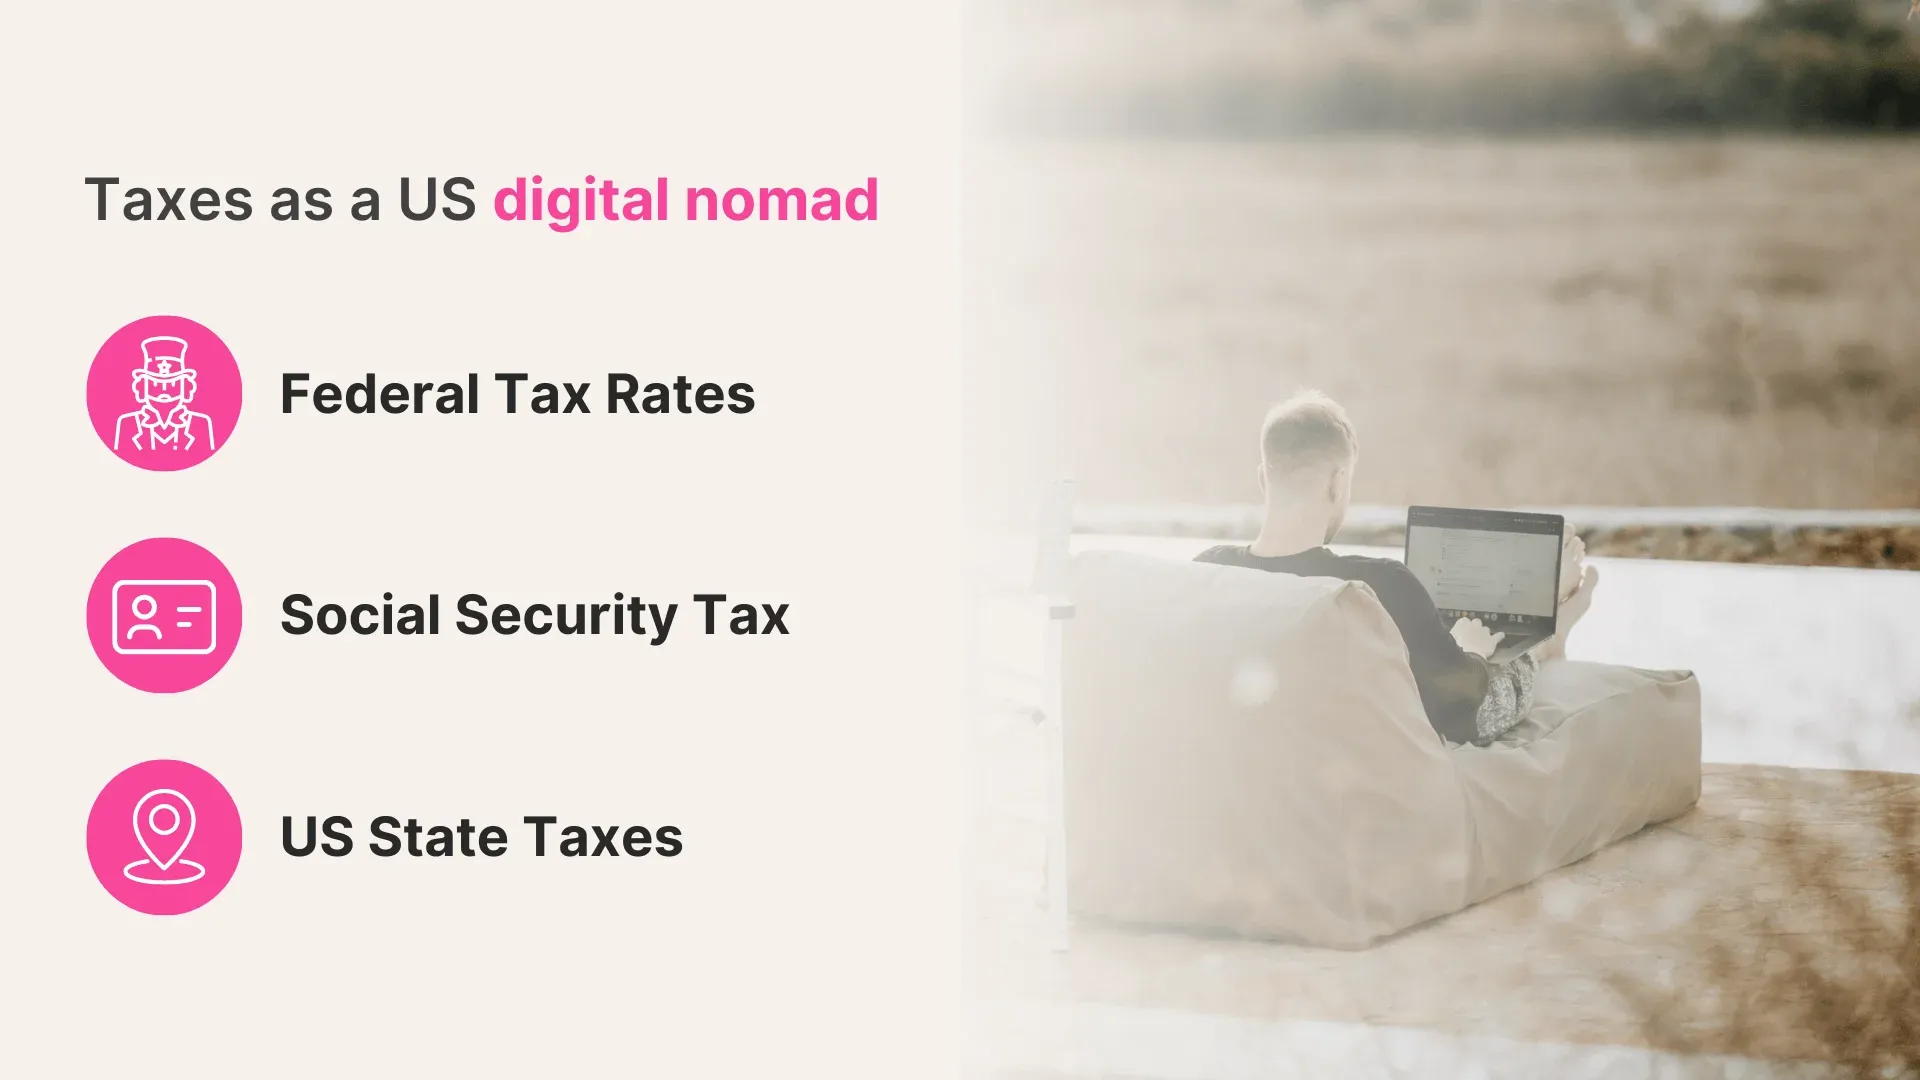 Taxes as a US digital nomad